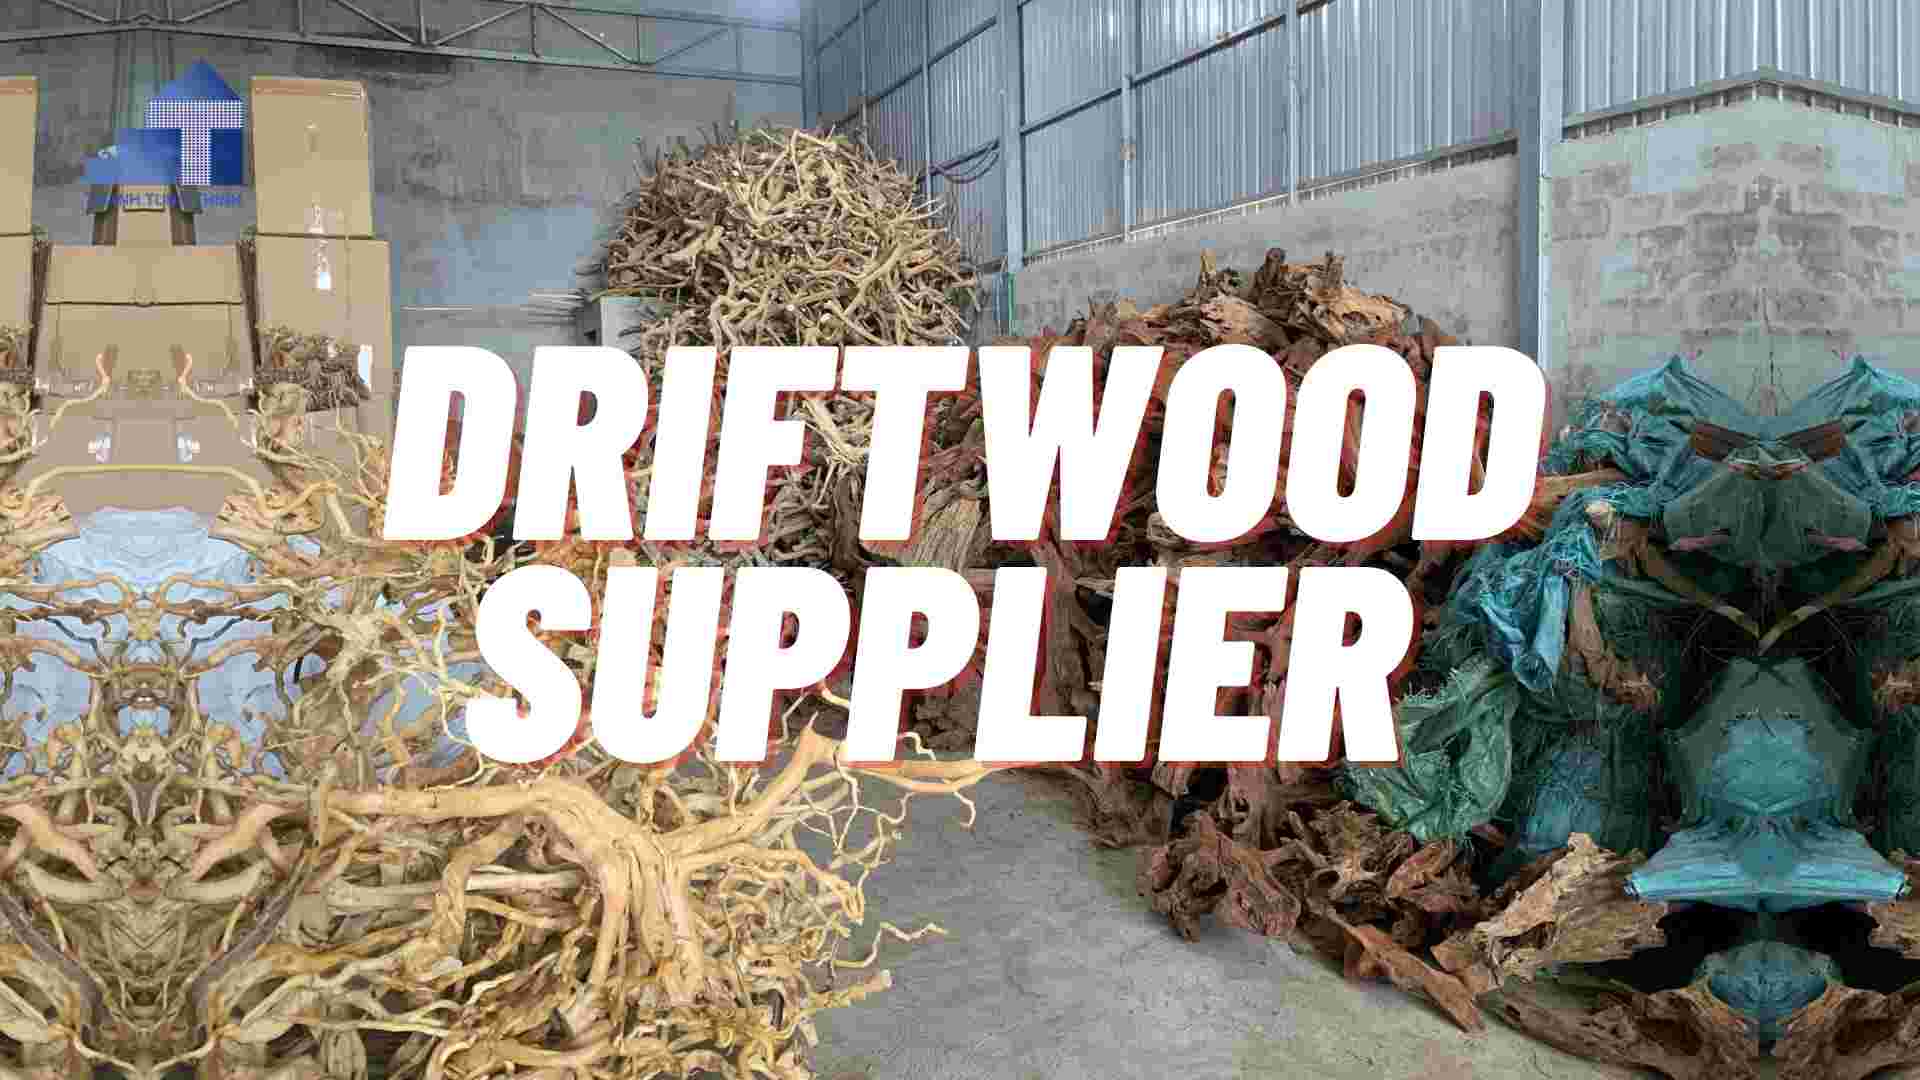 Driftwood Extravaganza: A Mass Unboxing Experience Like No Other! - Driftwood Supplier.